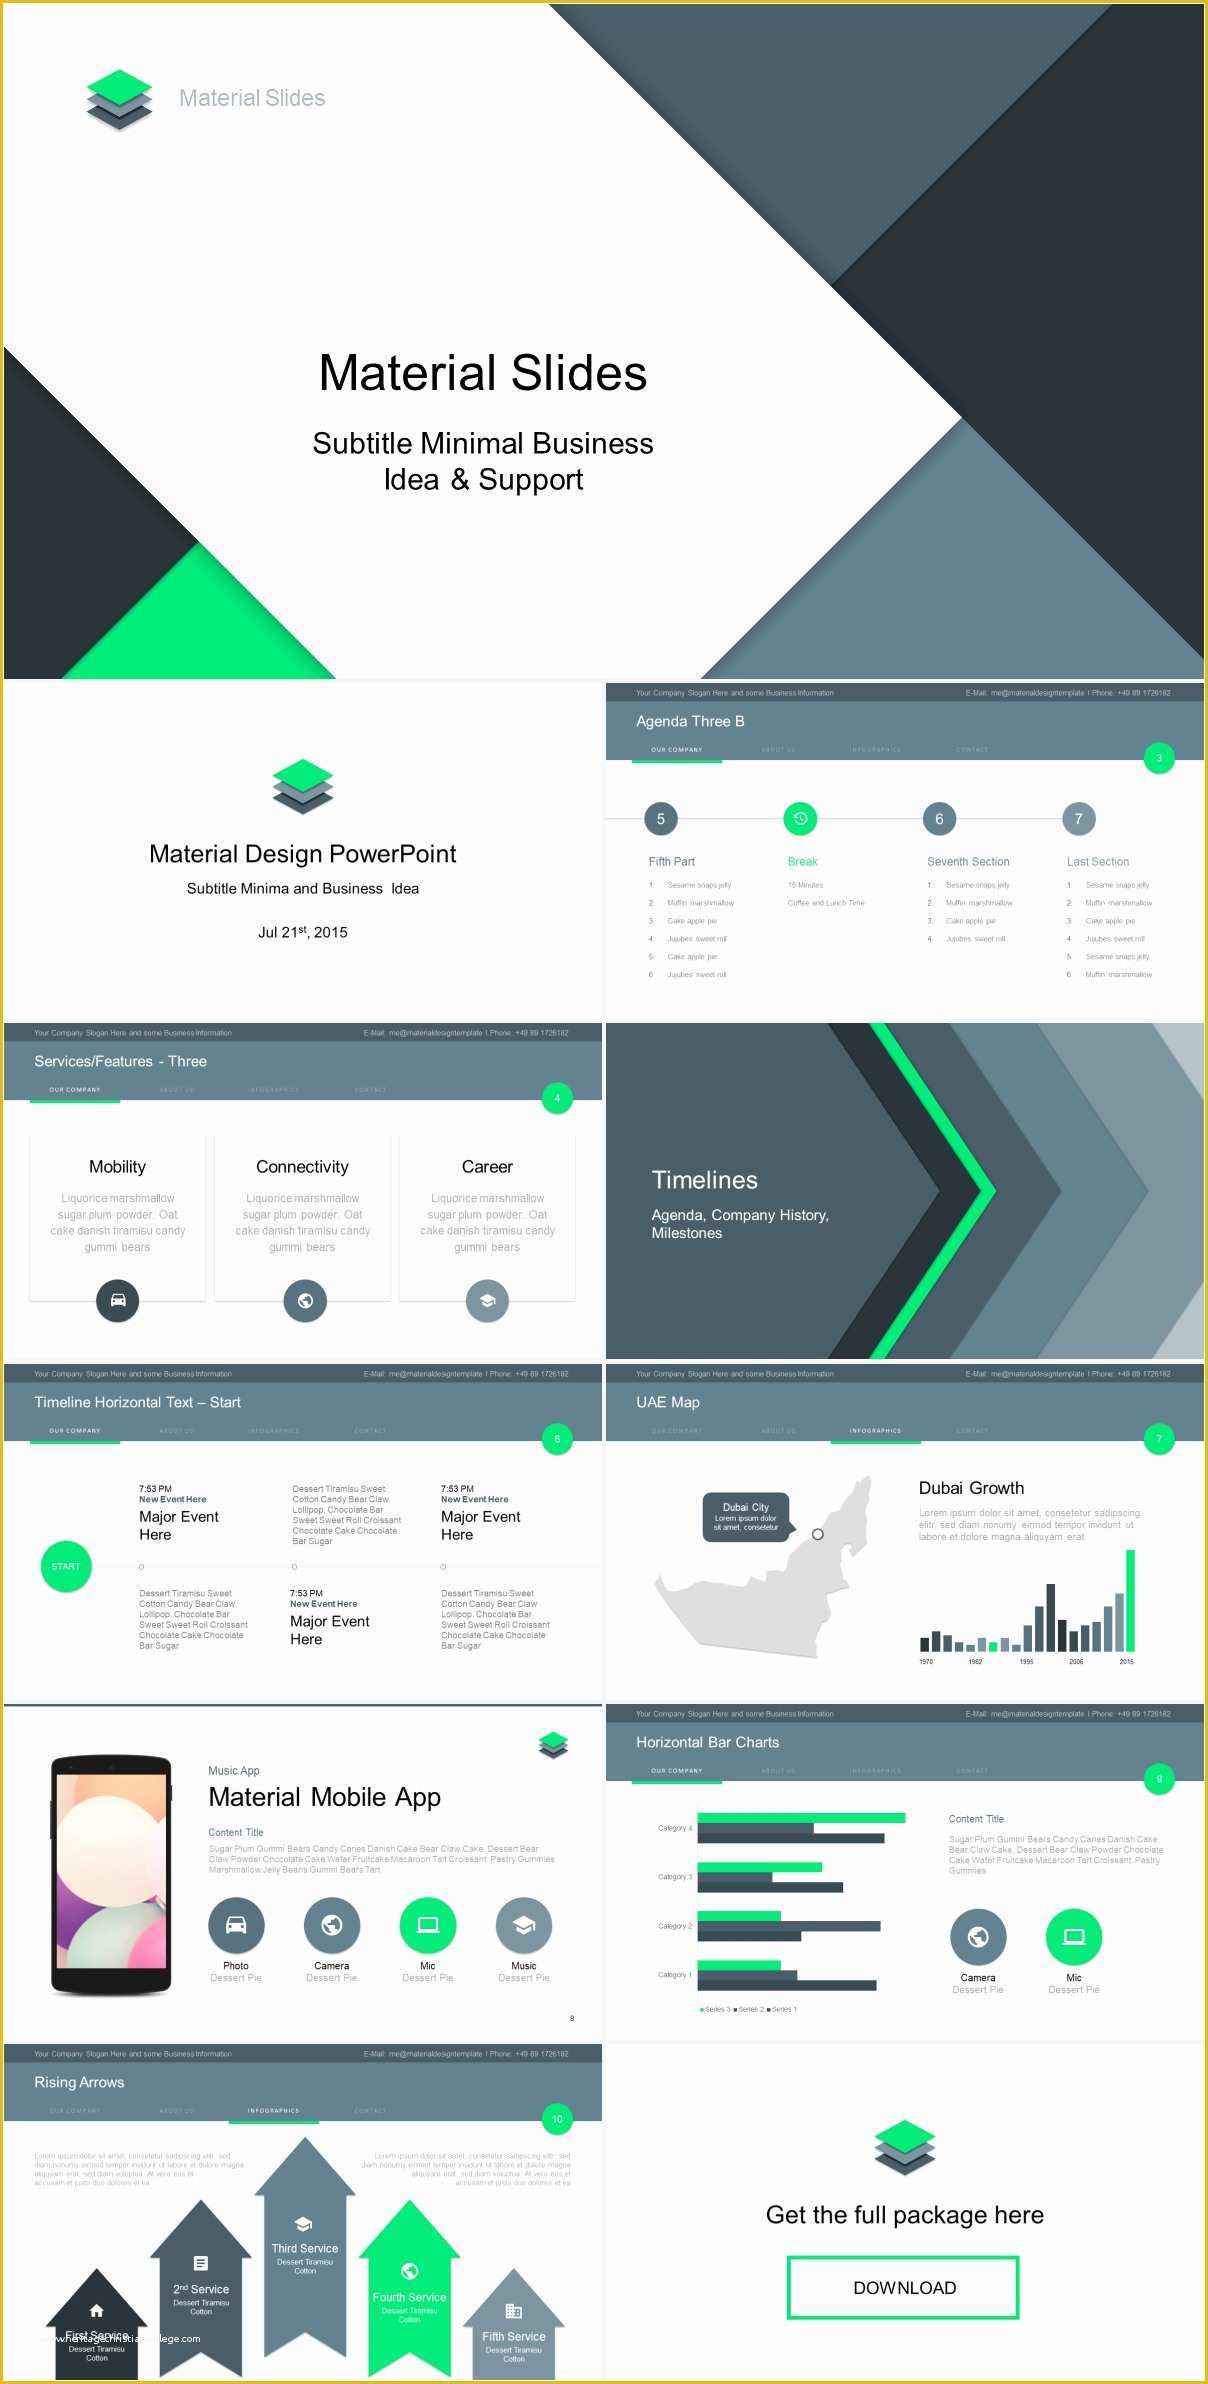 Free Ppt Templates Of Material Design Powerpoint Template Just Free Slides